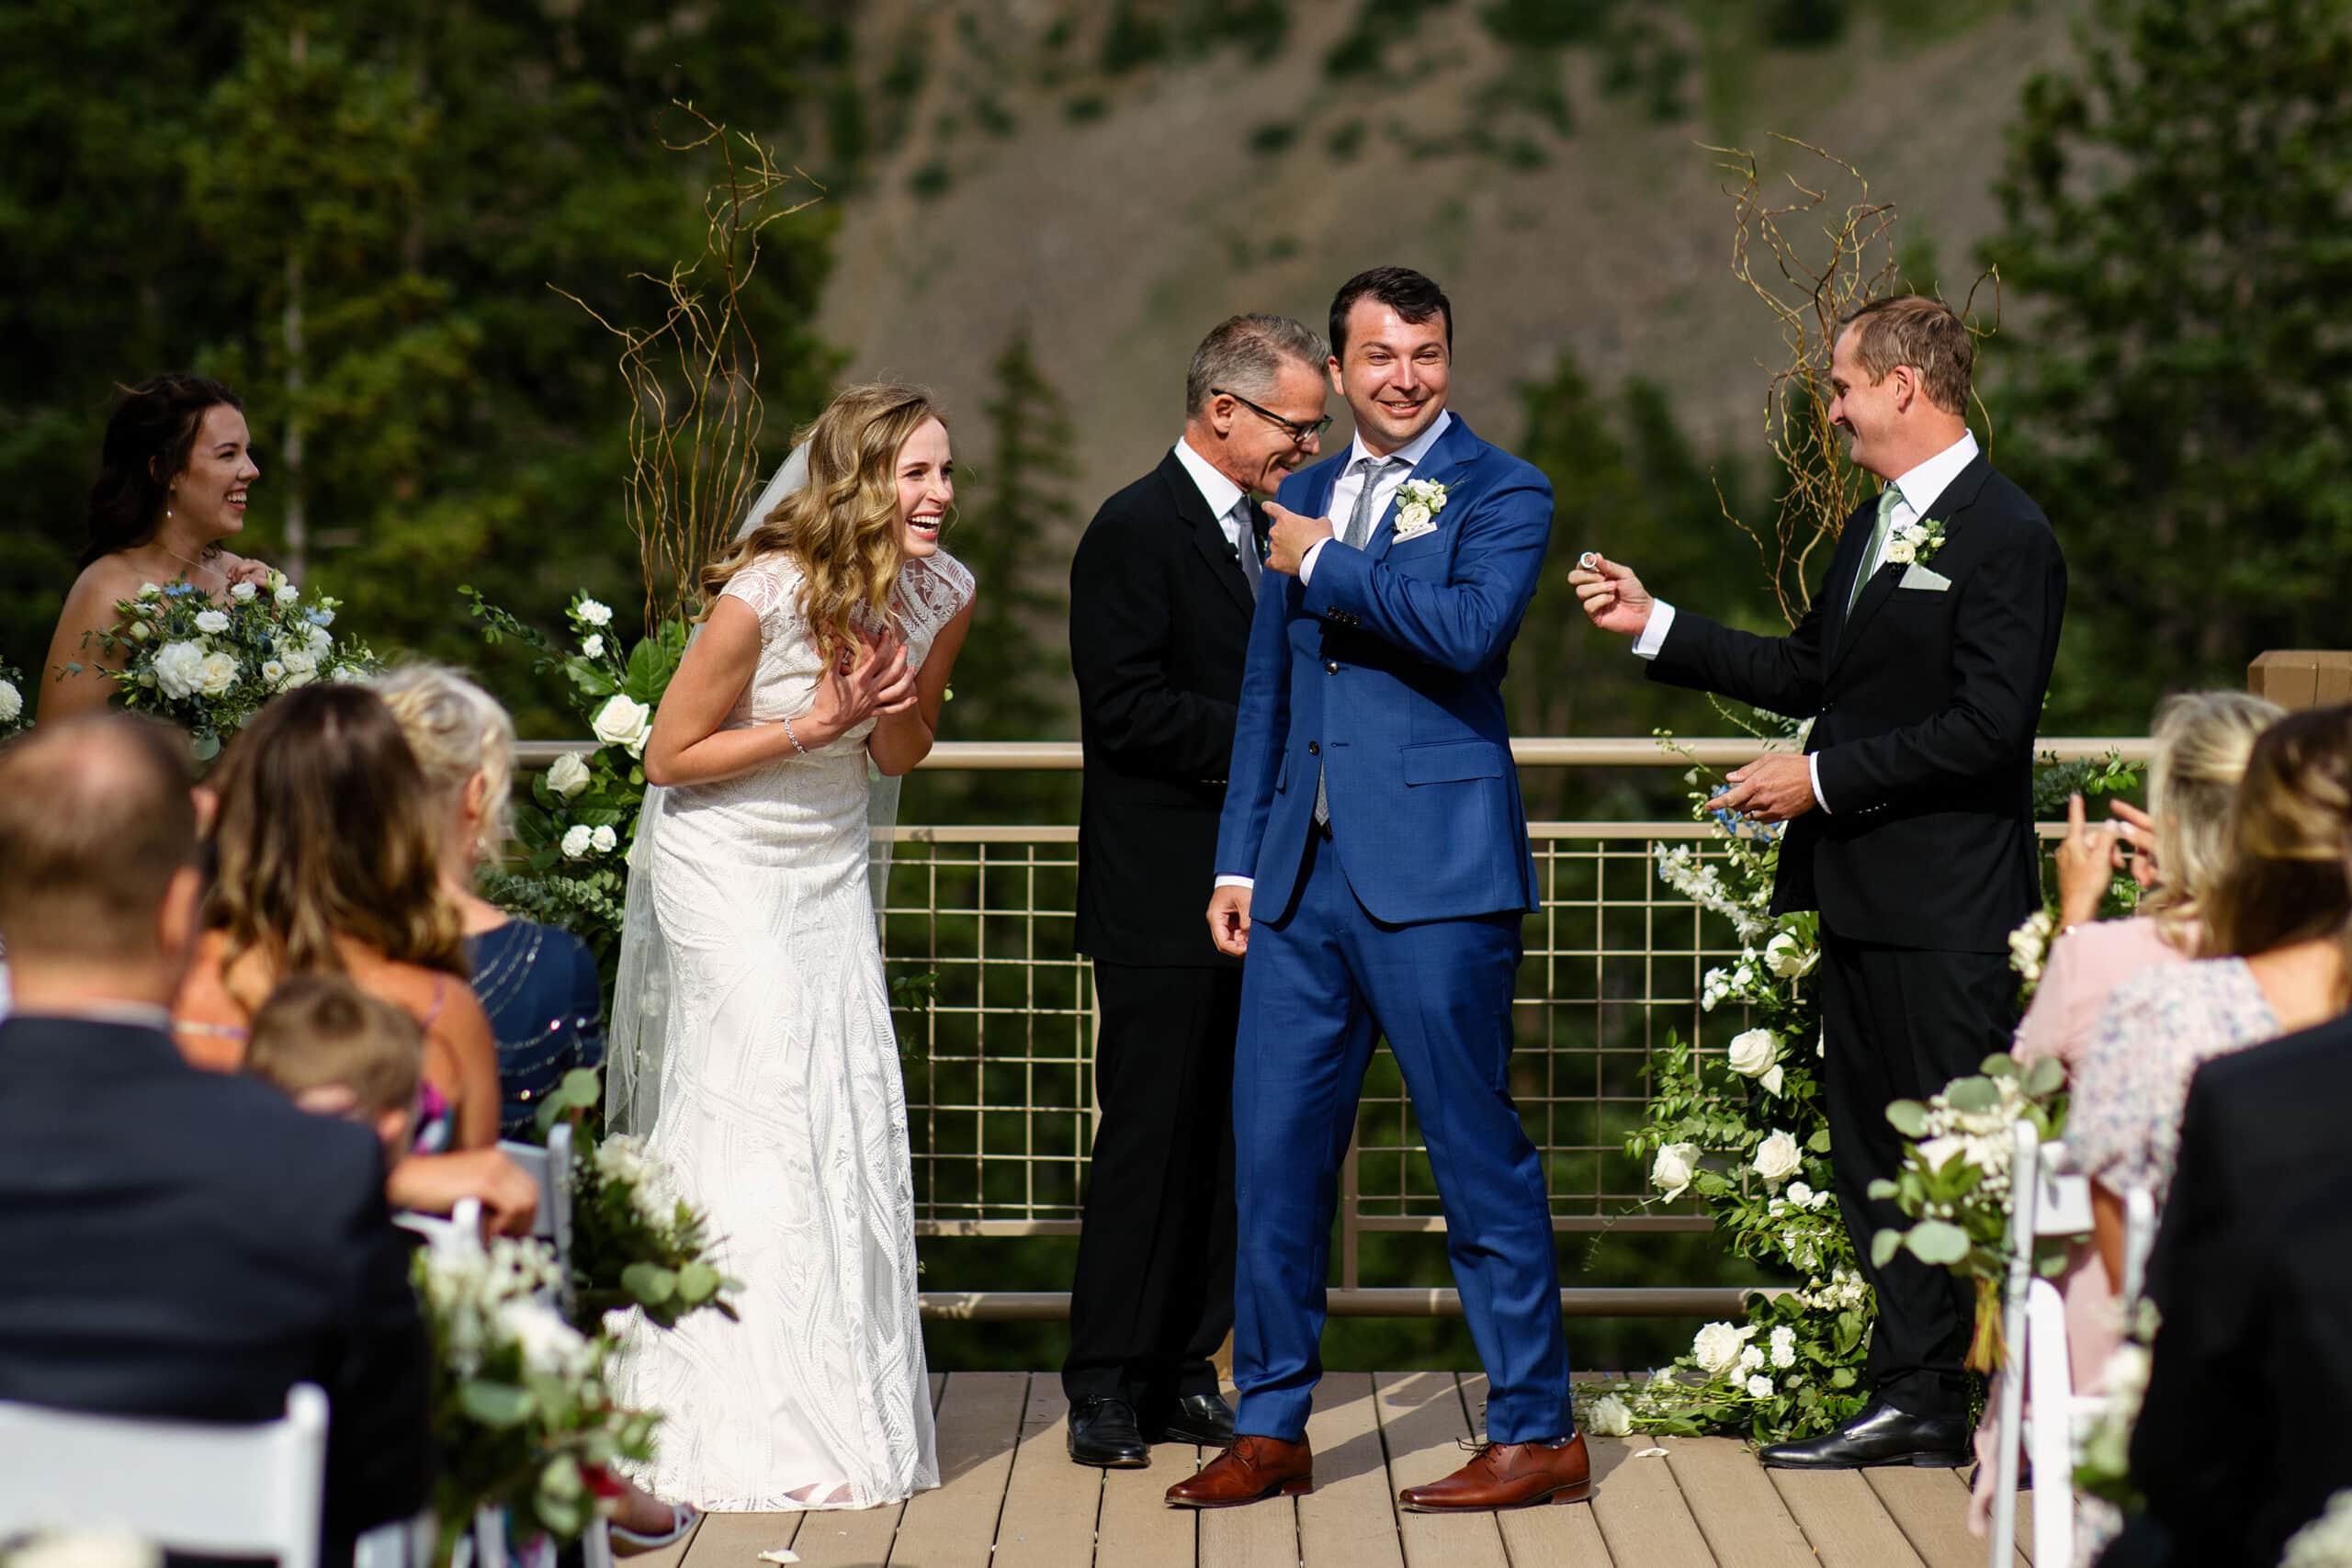 The bride and groom laugh as a groomsmen hands over the rings during their ceremony at Arapahoe Basin